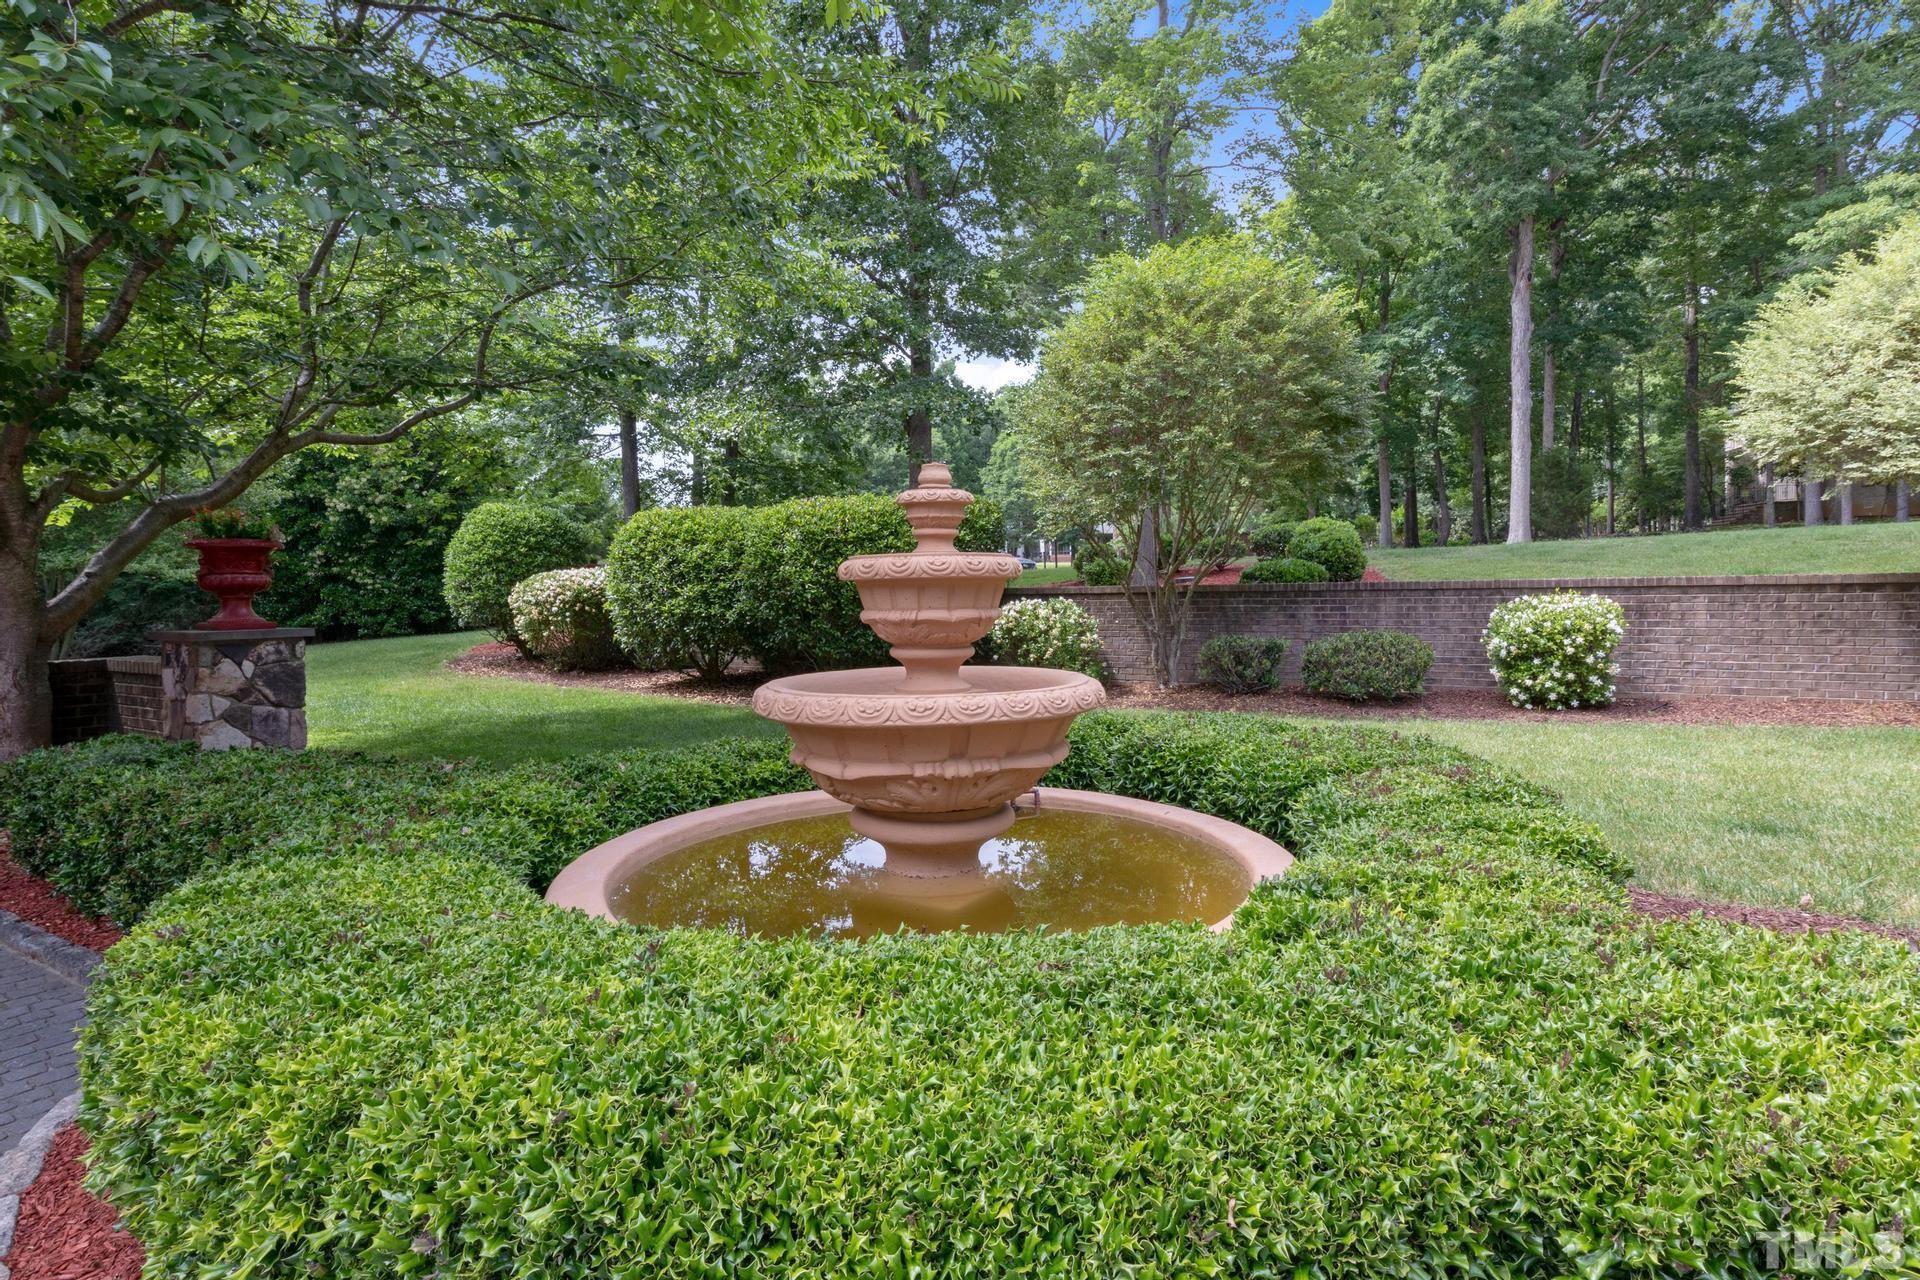 Fountain in the front yard